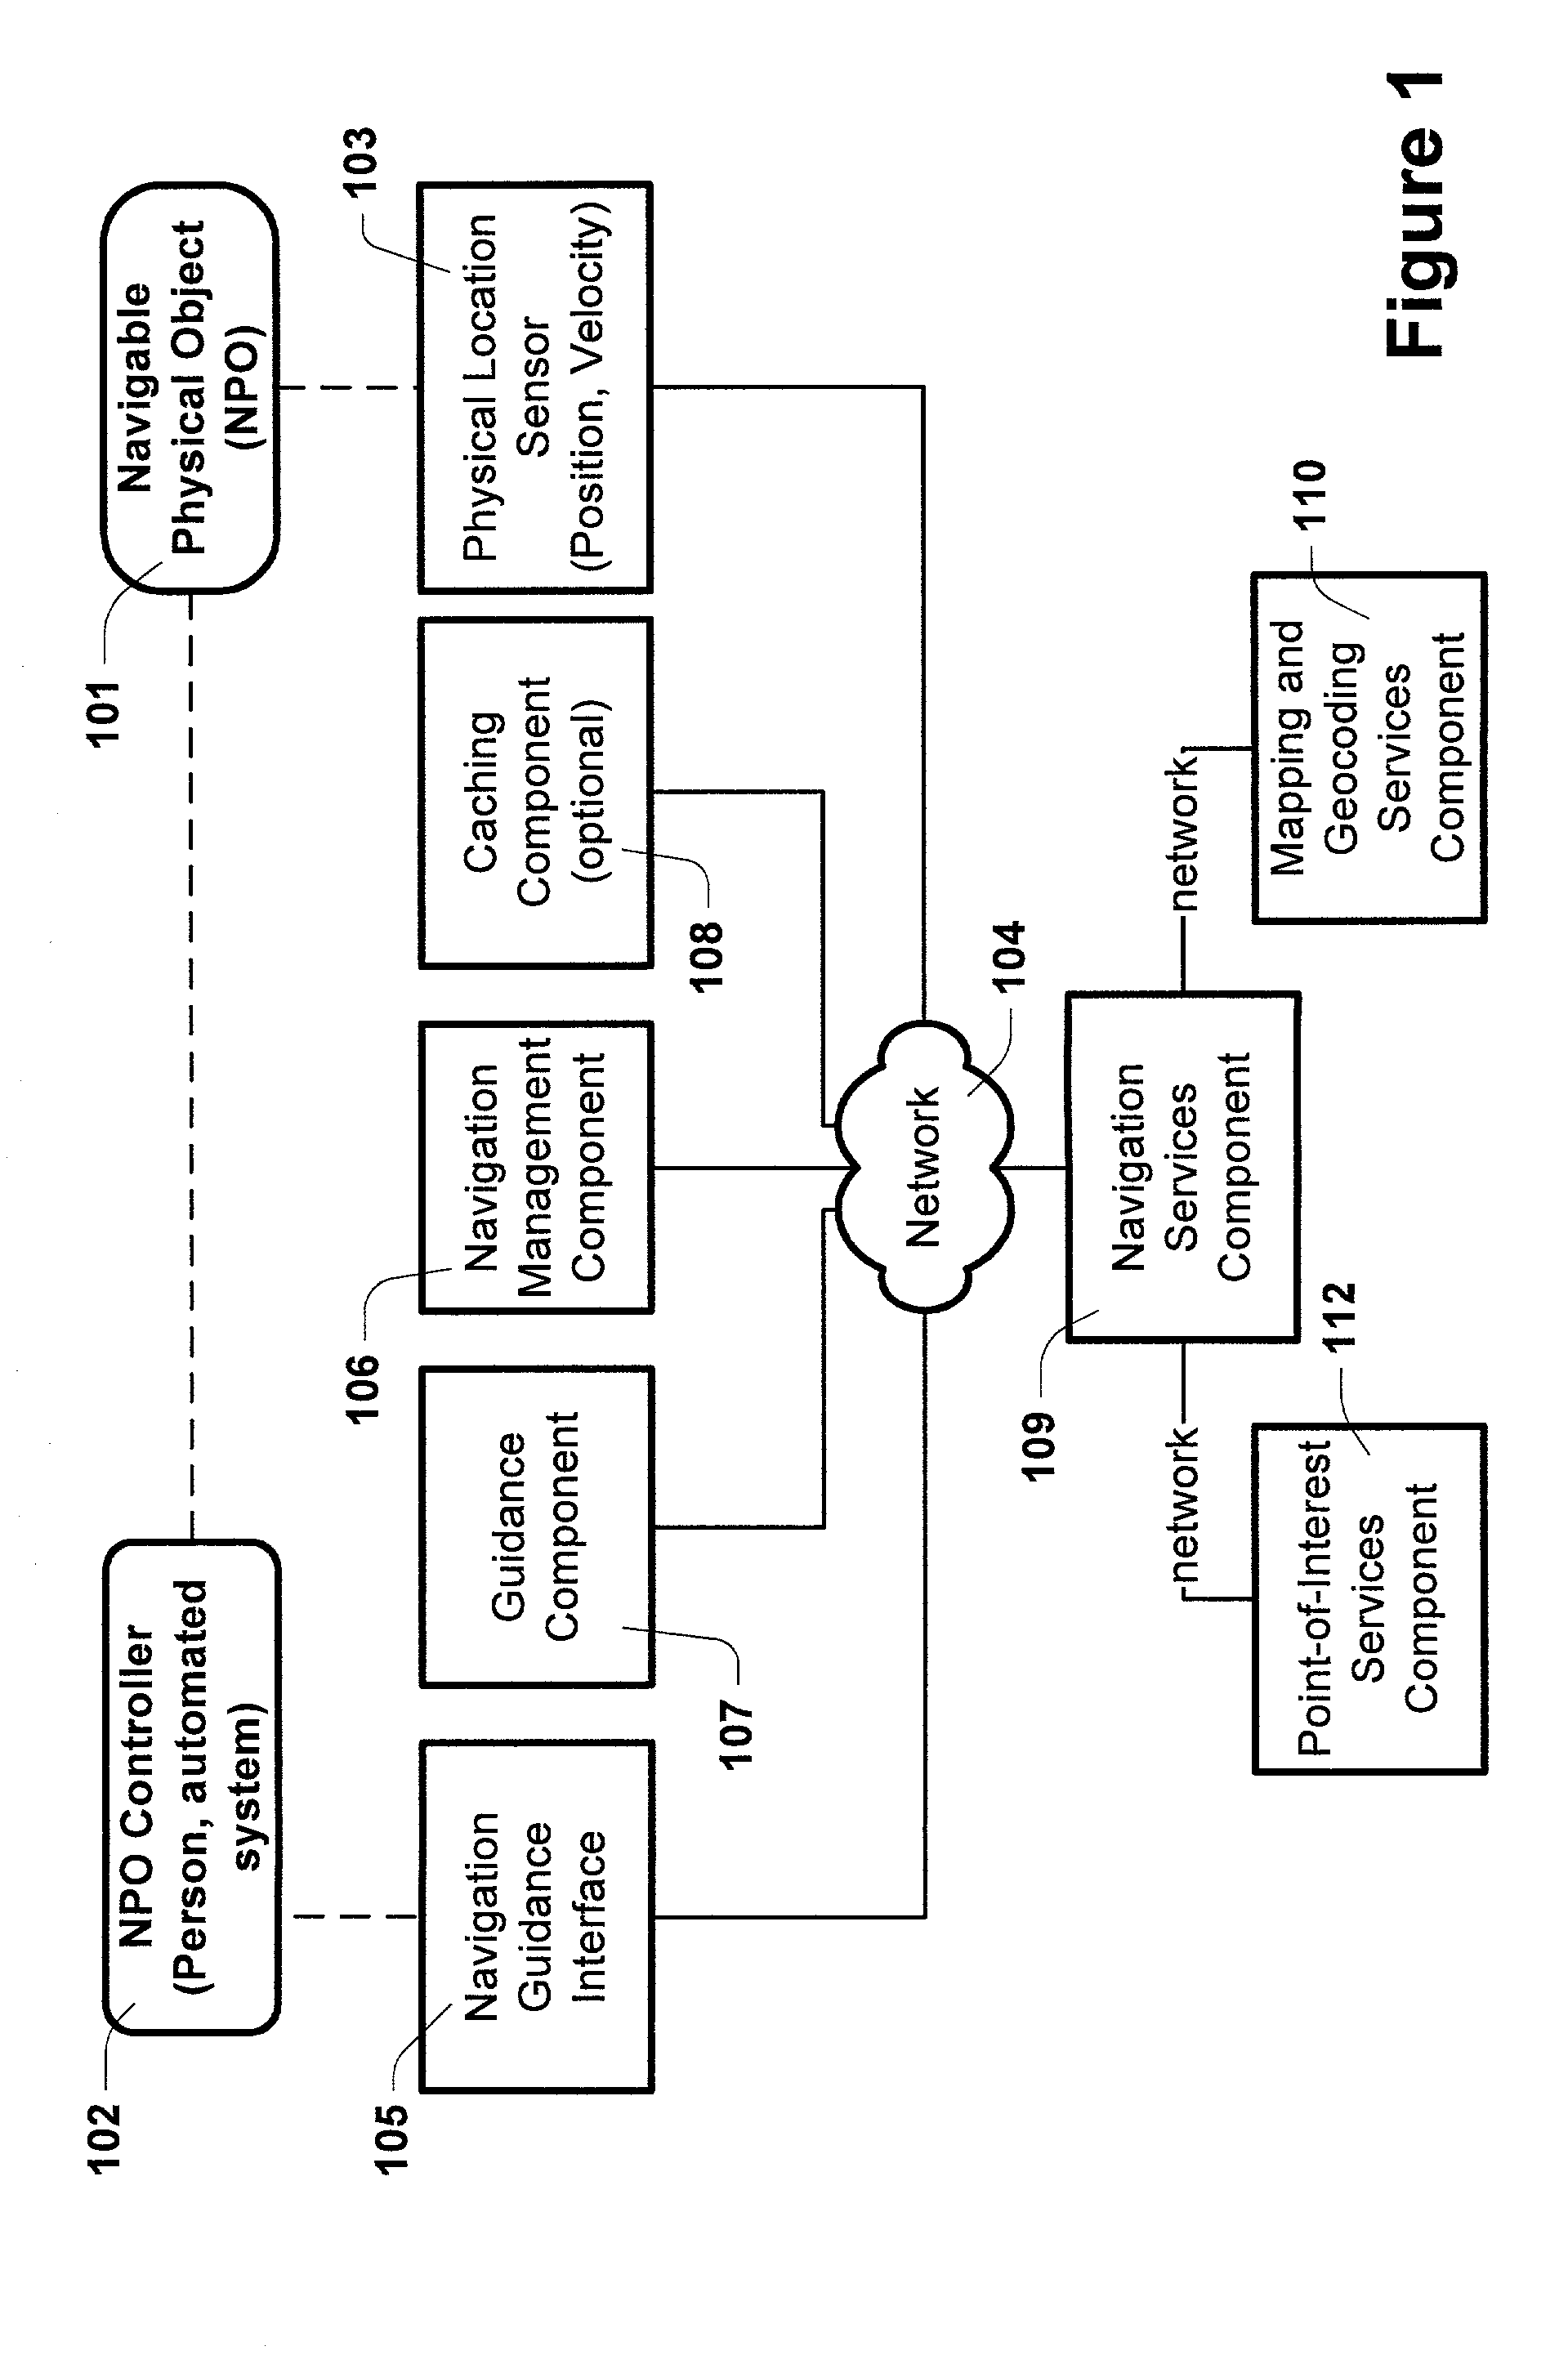 Method and system for distributed navigation and automated guidance